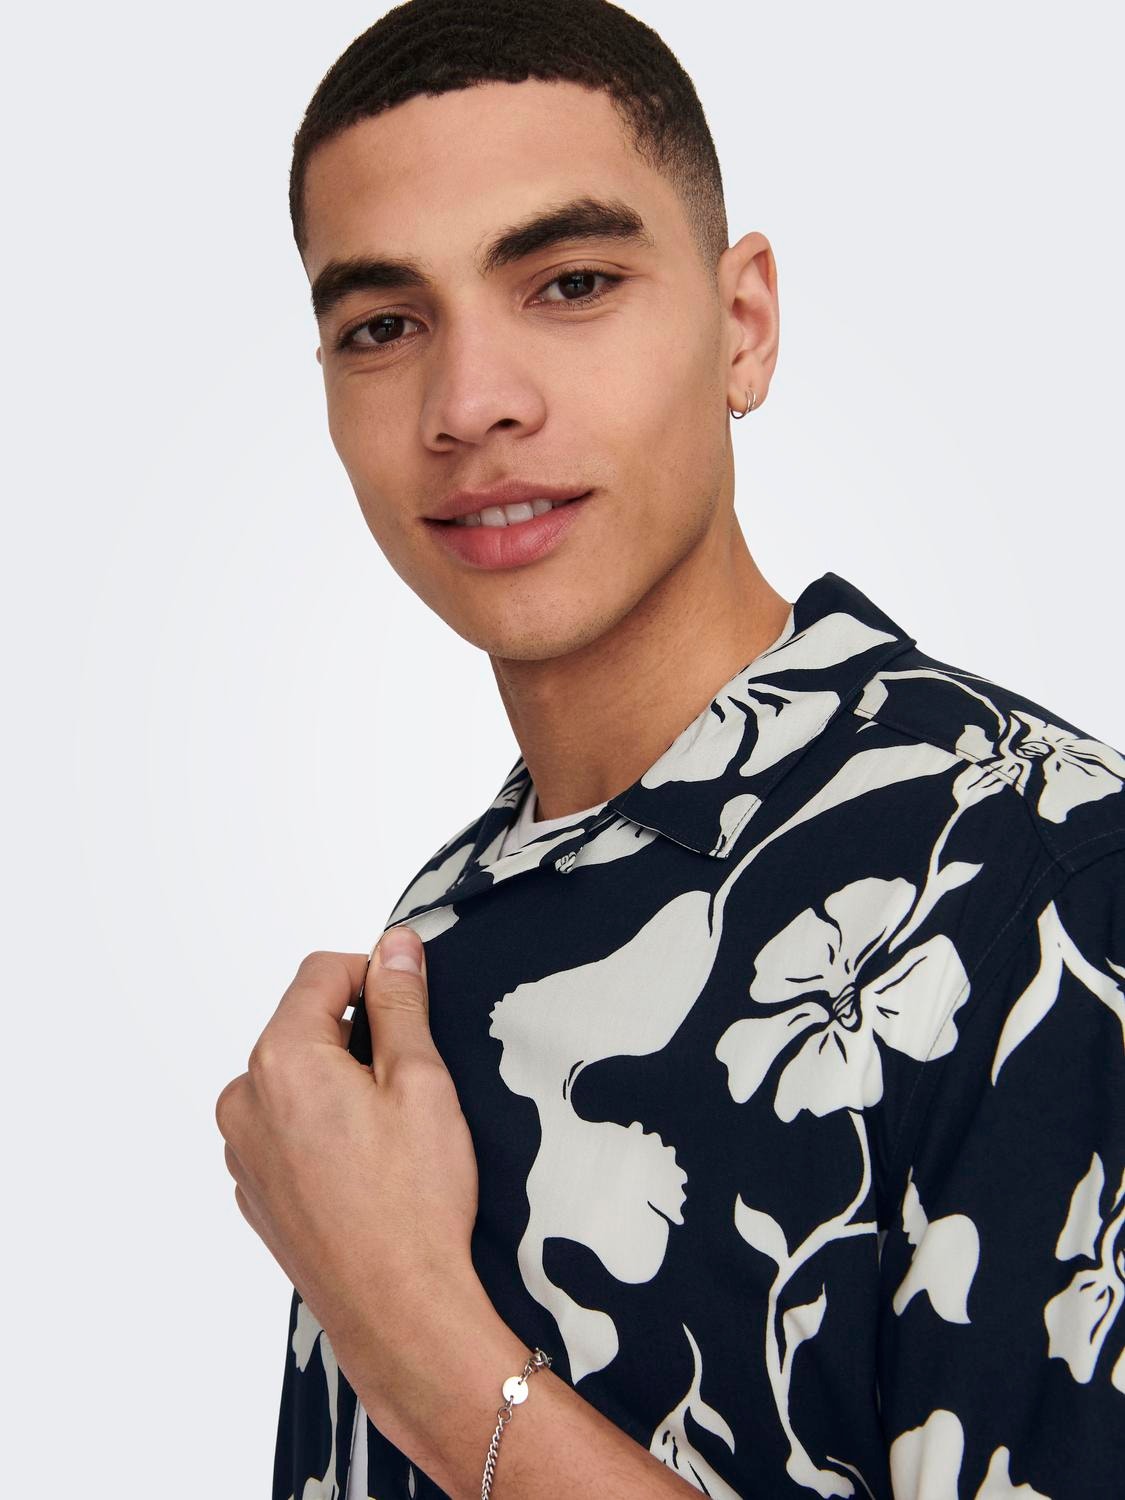 Men's Relaxed Fit Floral Resort Shirt